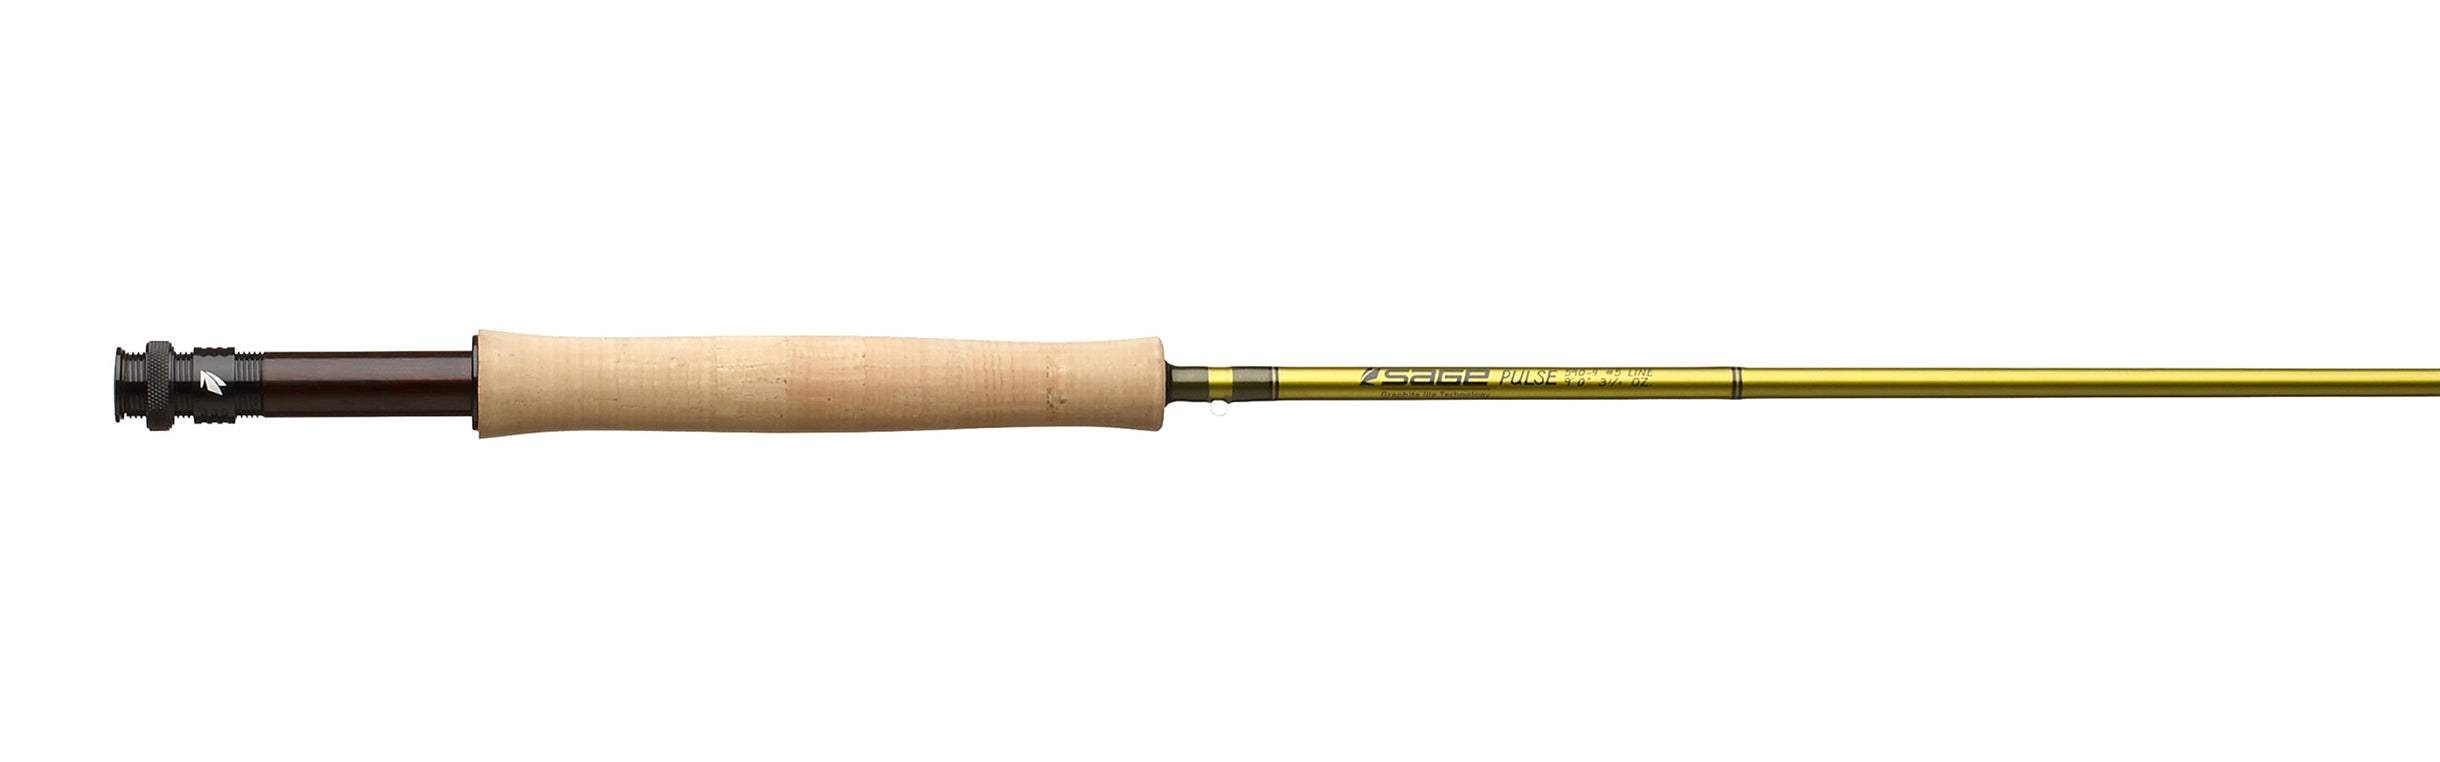 Sage PULSE Fly Rods - Freshwater [DISCONTINUED]